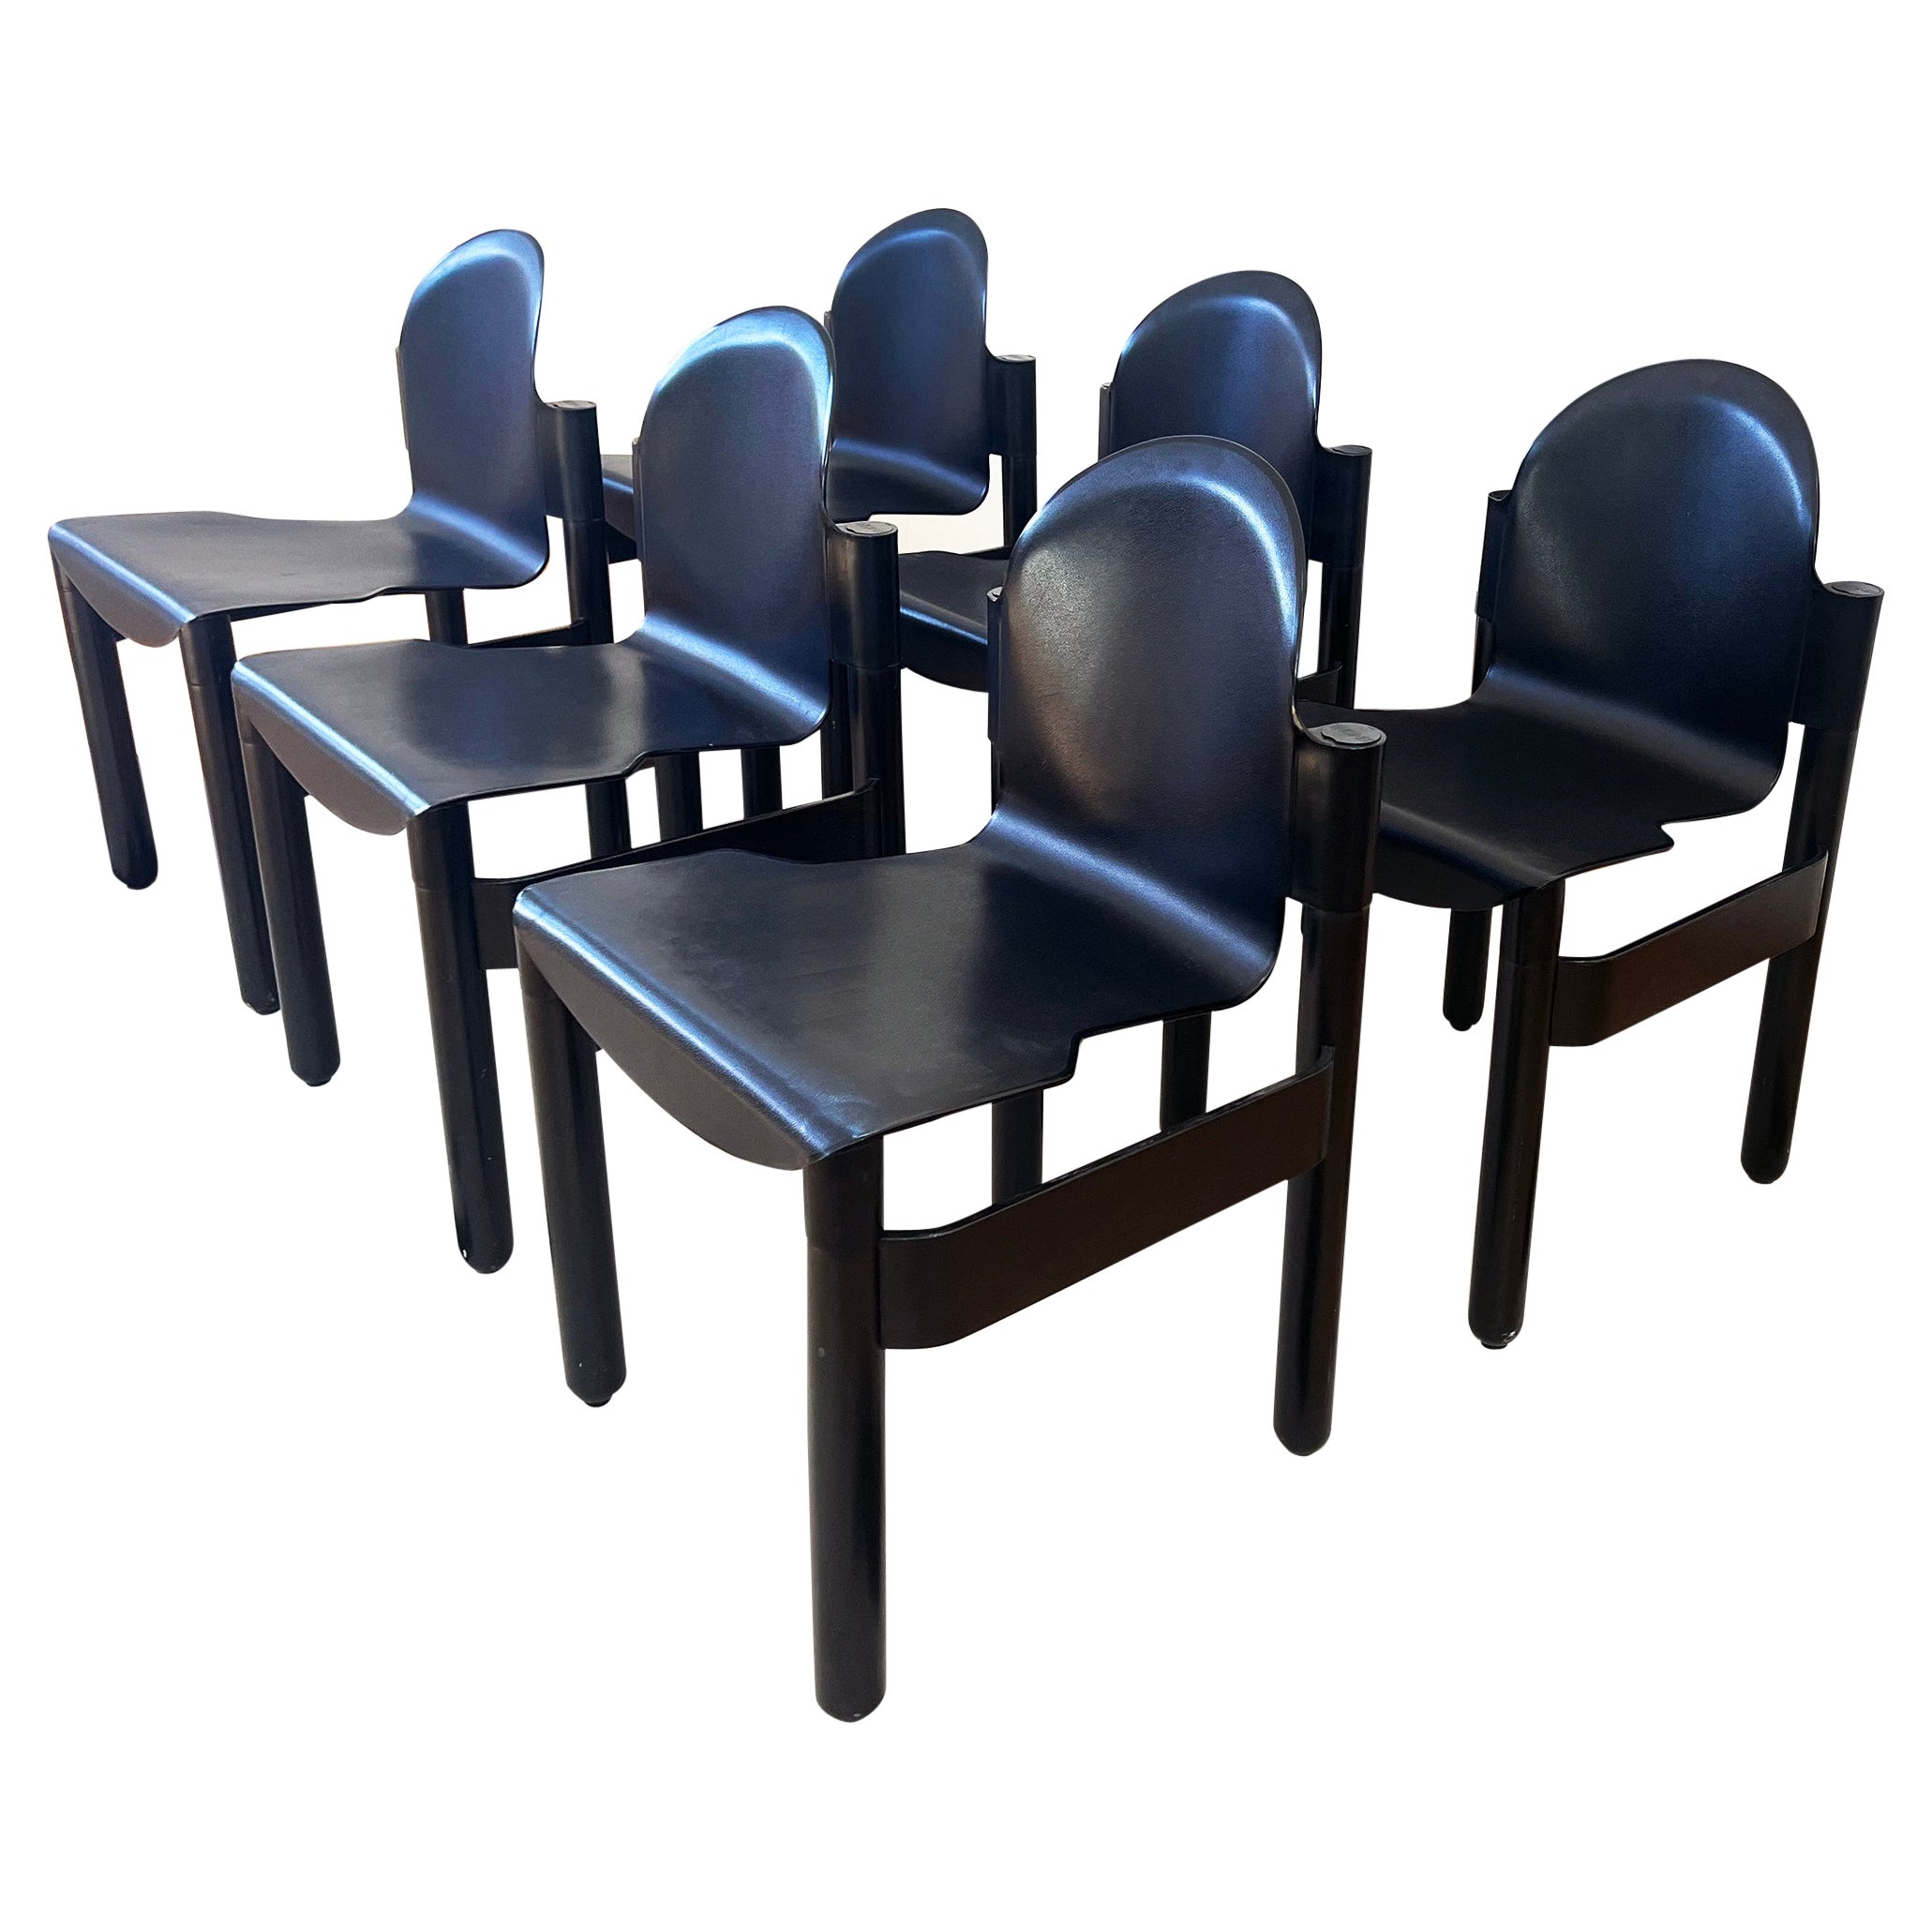 Postmodern 1980s Flex 2000 Stacking Chairs by Gerd Lange for Thonet, Solid Black